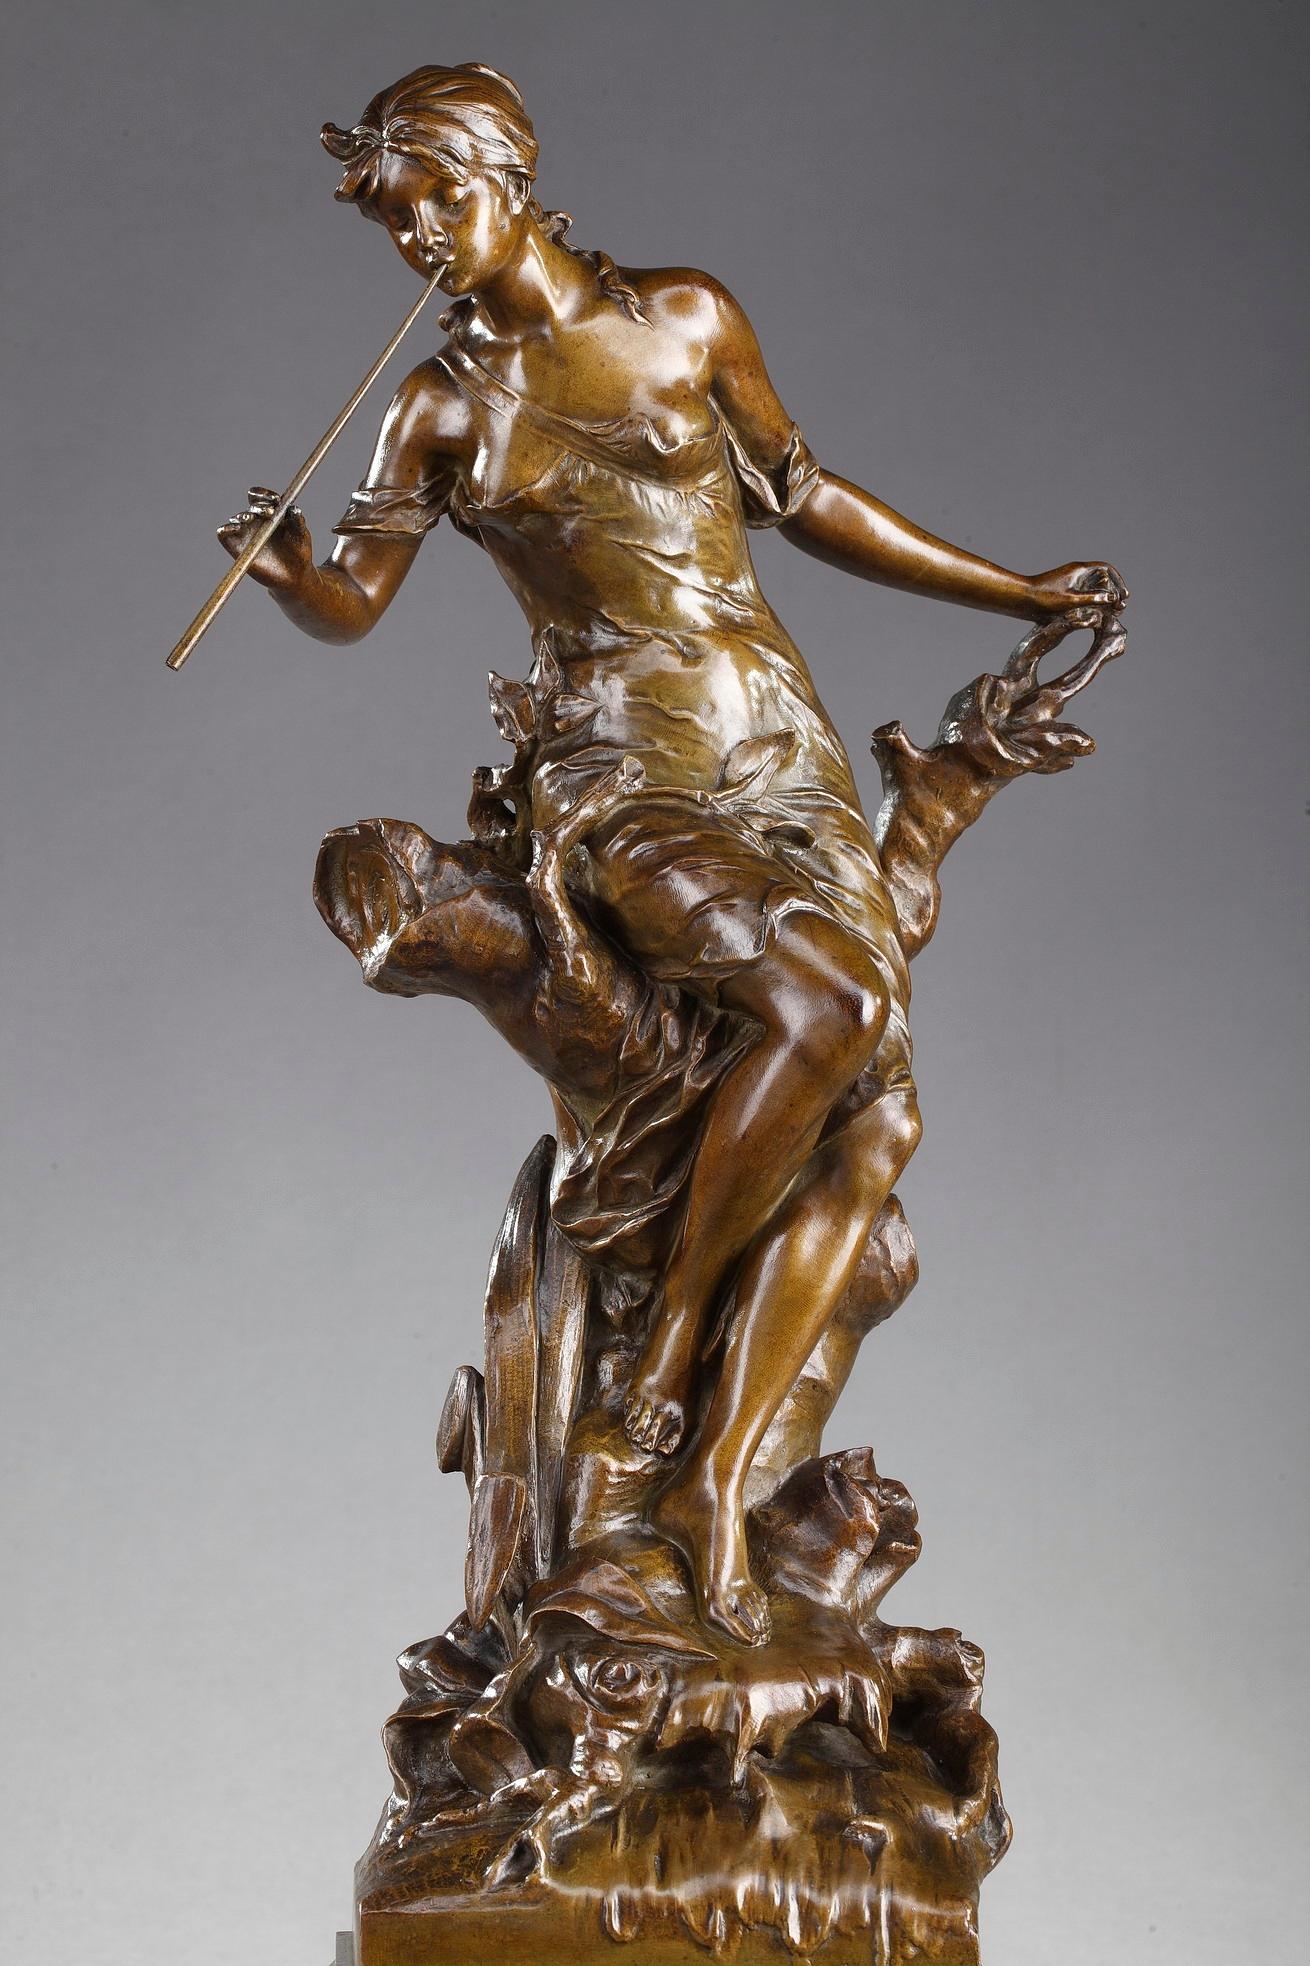 Late 19th century Art Nouveau period bronze casting with brown patina by Édouard Drouot. This allegorical sculpture for which the artist received a medal, features a young woman sitting on a branch near a river, and playing the flute. Signed: E.